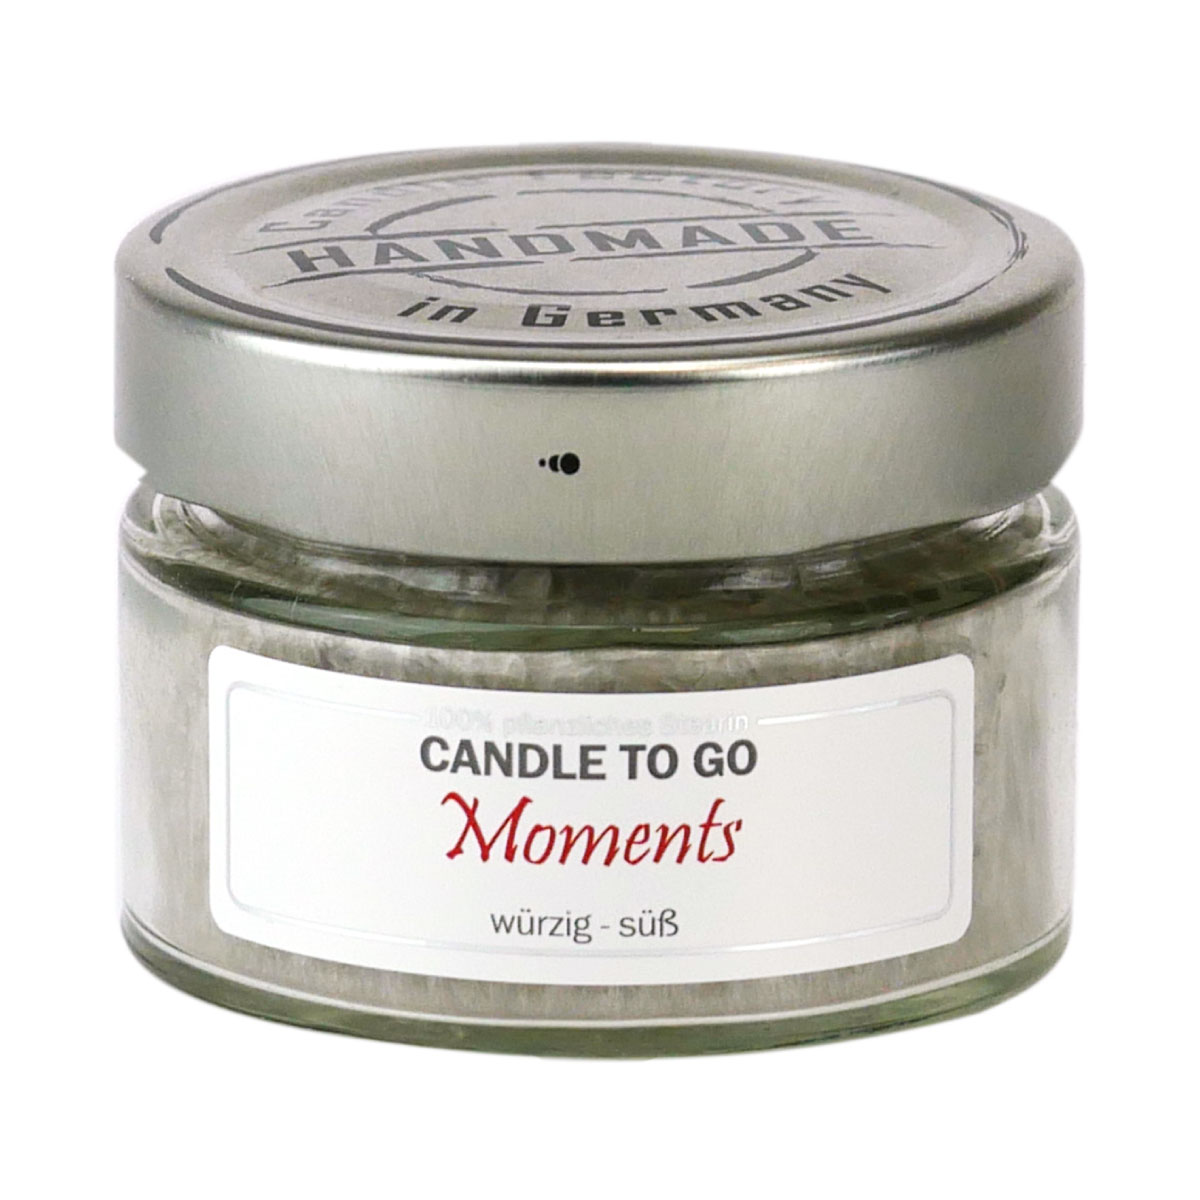 Moments - Candle to Go Duftkerze von Candle Factory